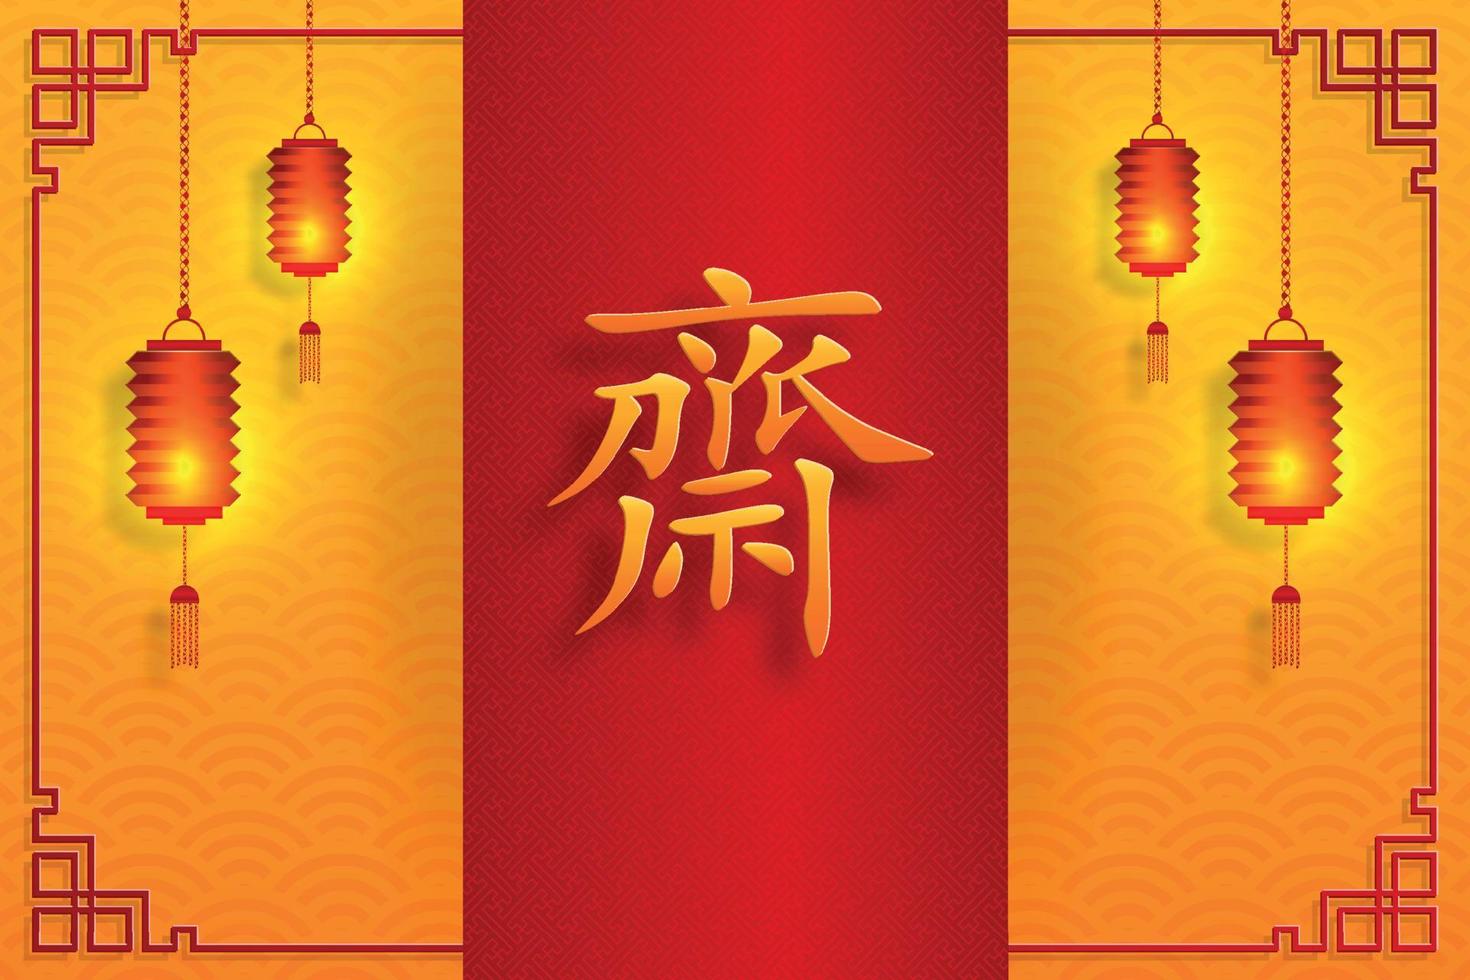 Chinese vegetarian festival, paper cut and asian elements with craft style on color background vector